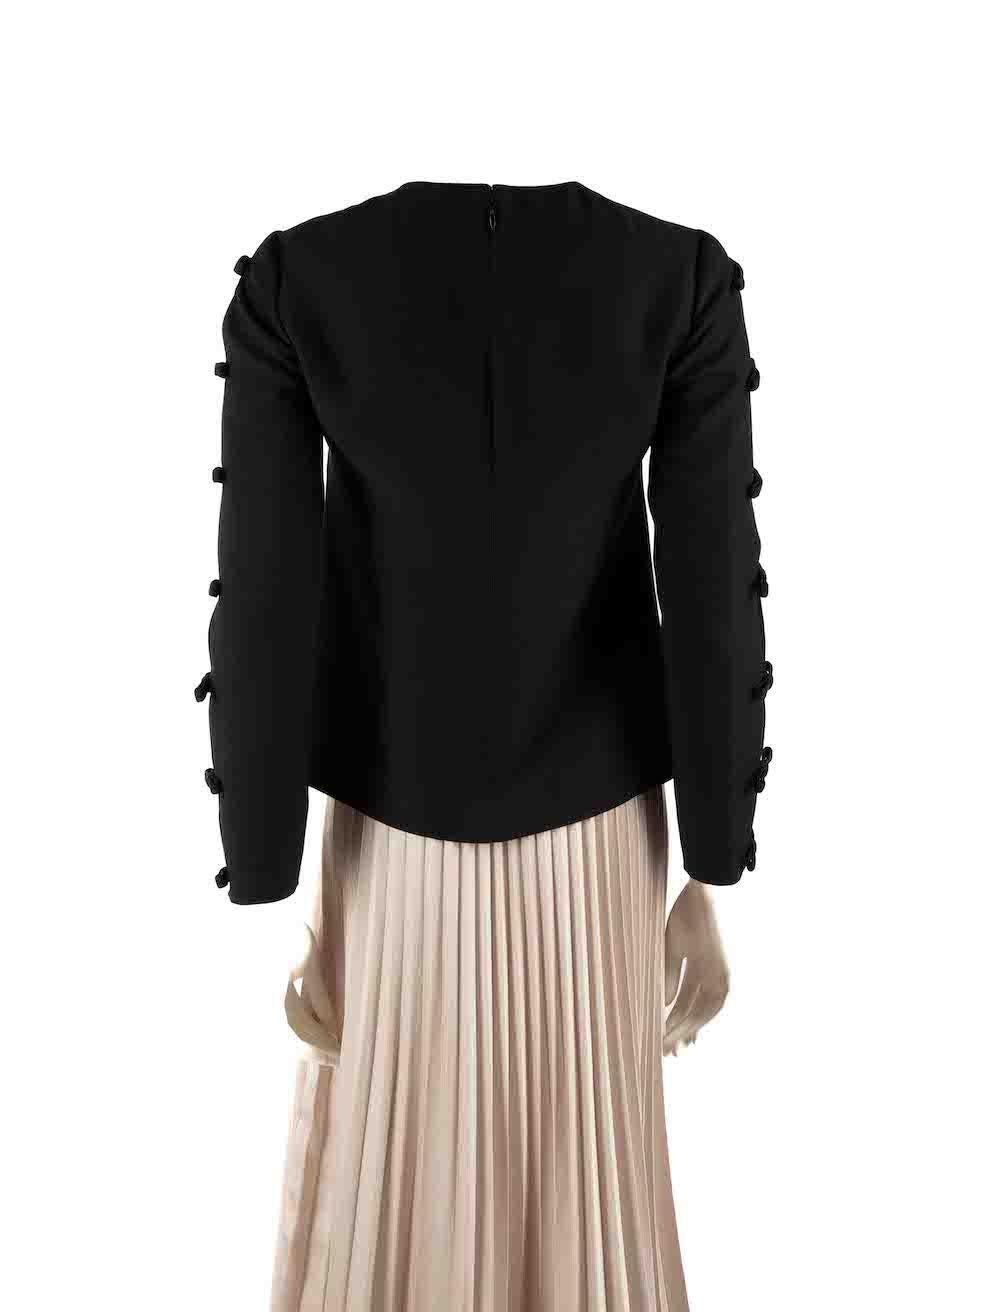 Valentino Garavani Black Wool Bow Detail Long Sleeve Top Size XS In Excellent Condition For Sale In London, GB